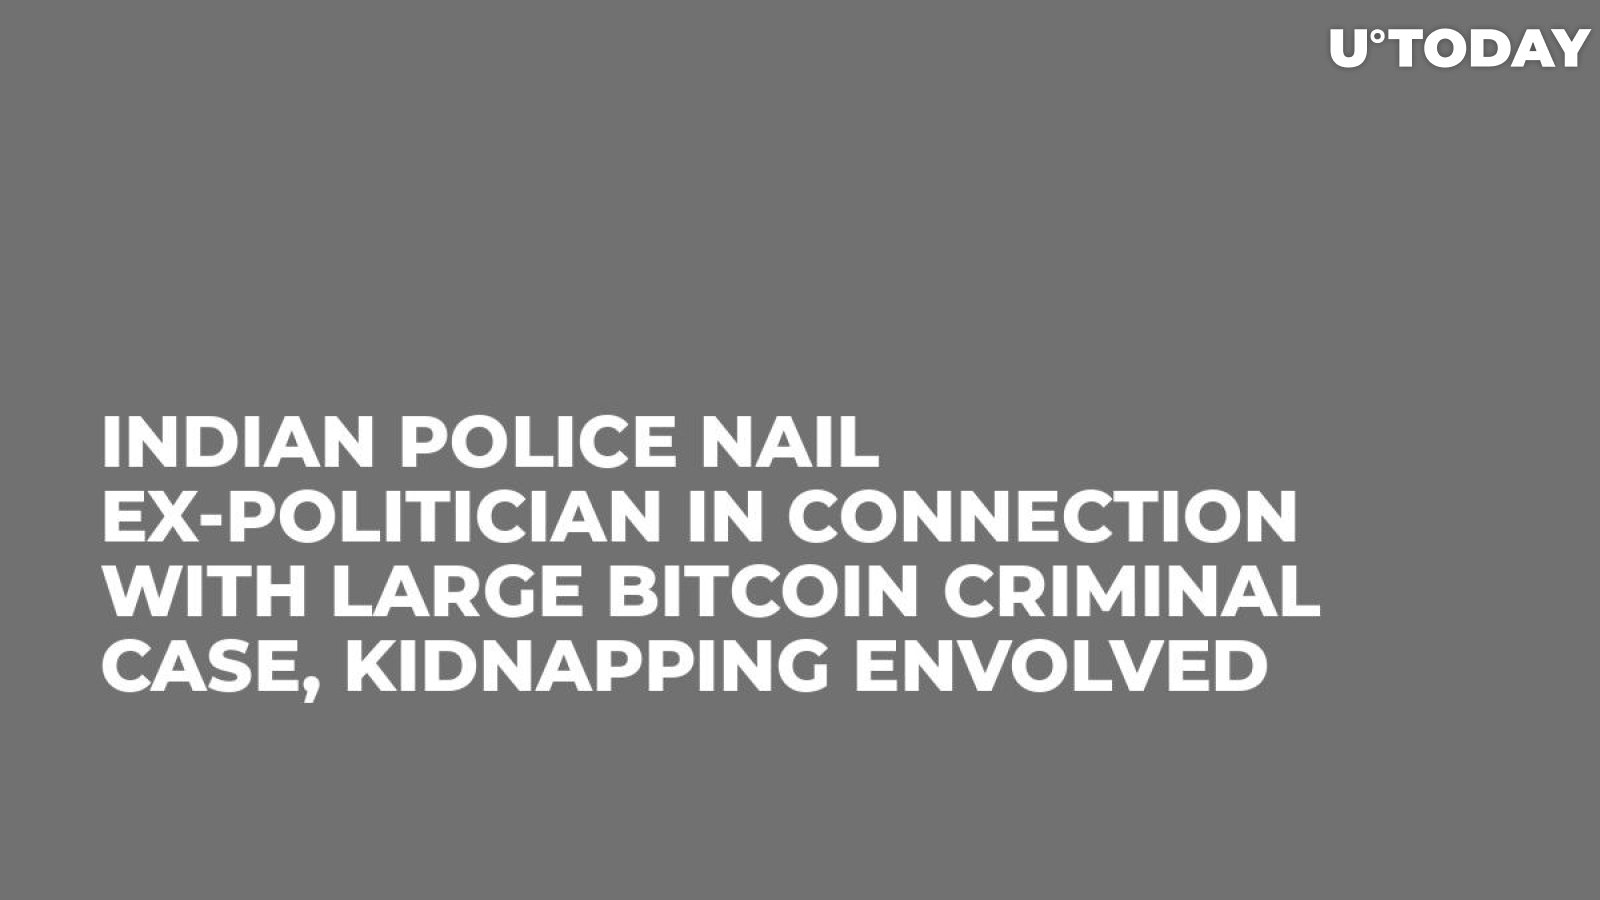 Indian Police Nail Ex-Politician In Connection with Large Bitcoin Criminal Case, Kidnapping Envolved